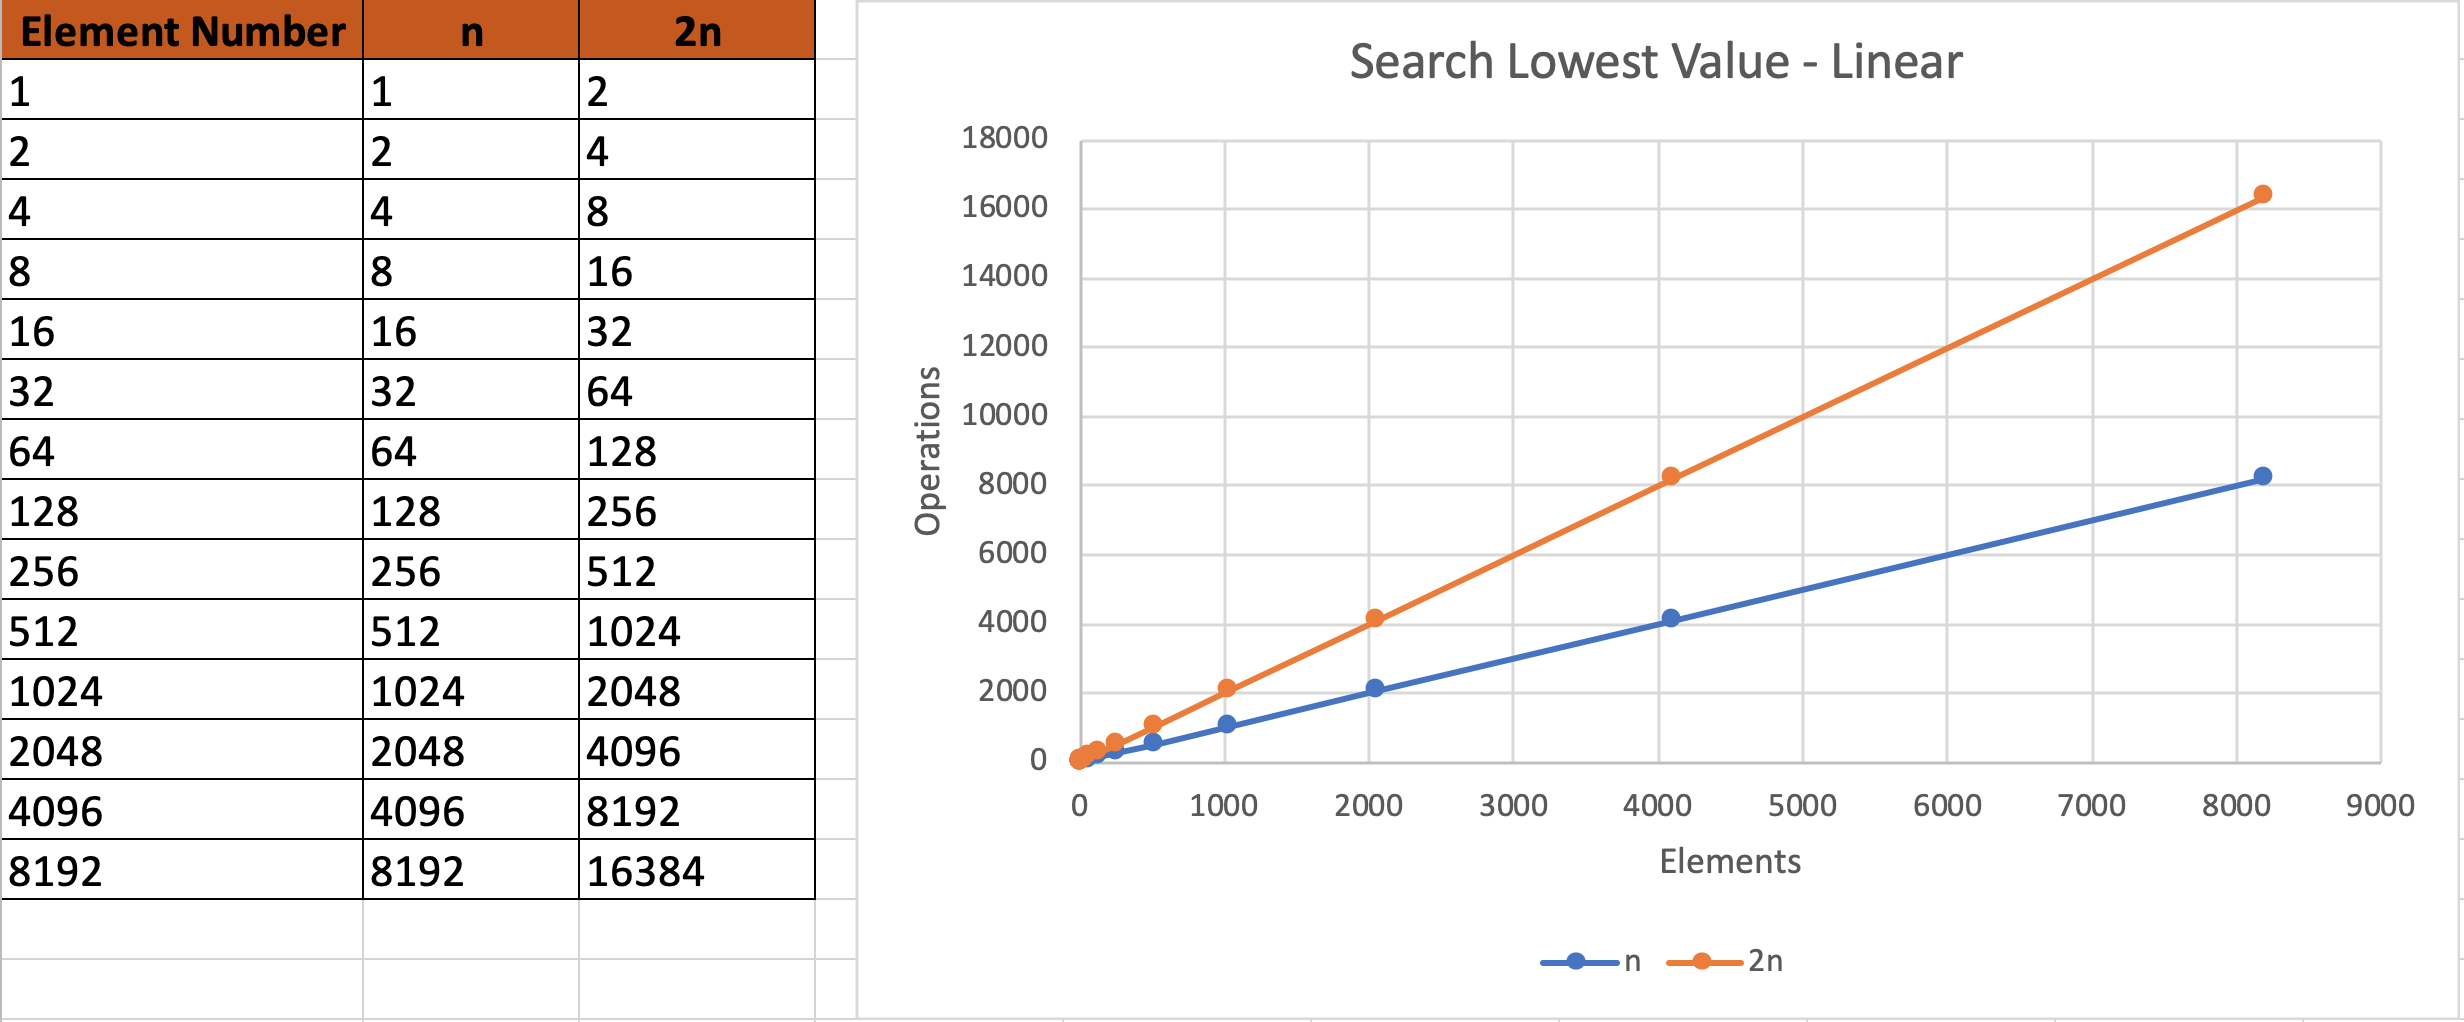 Search Lowest Value